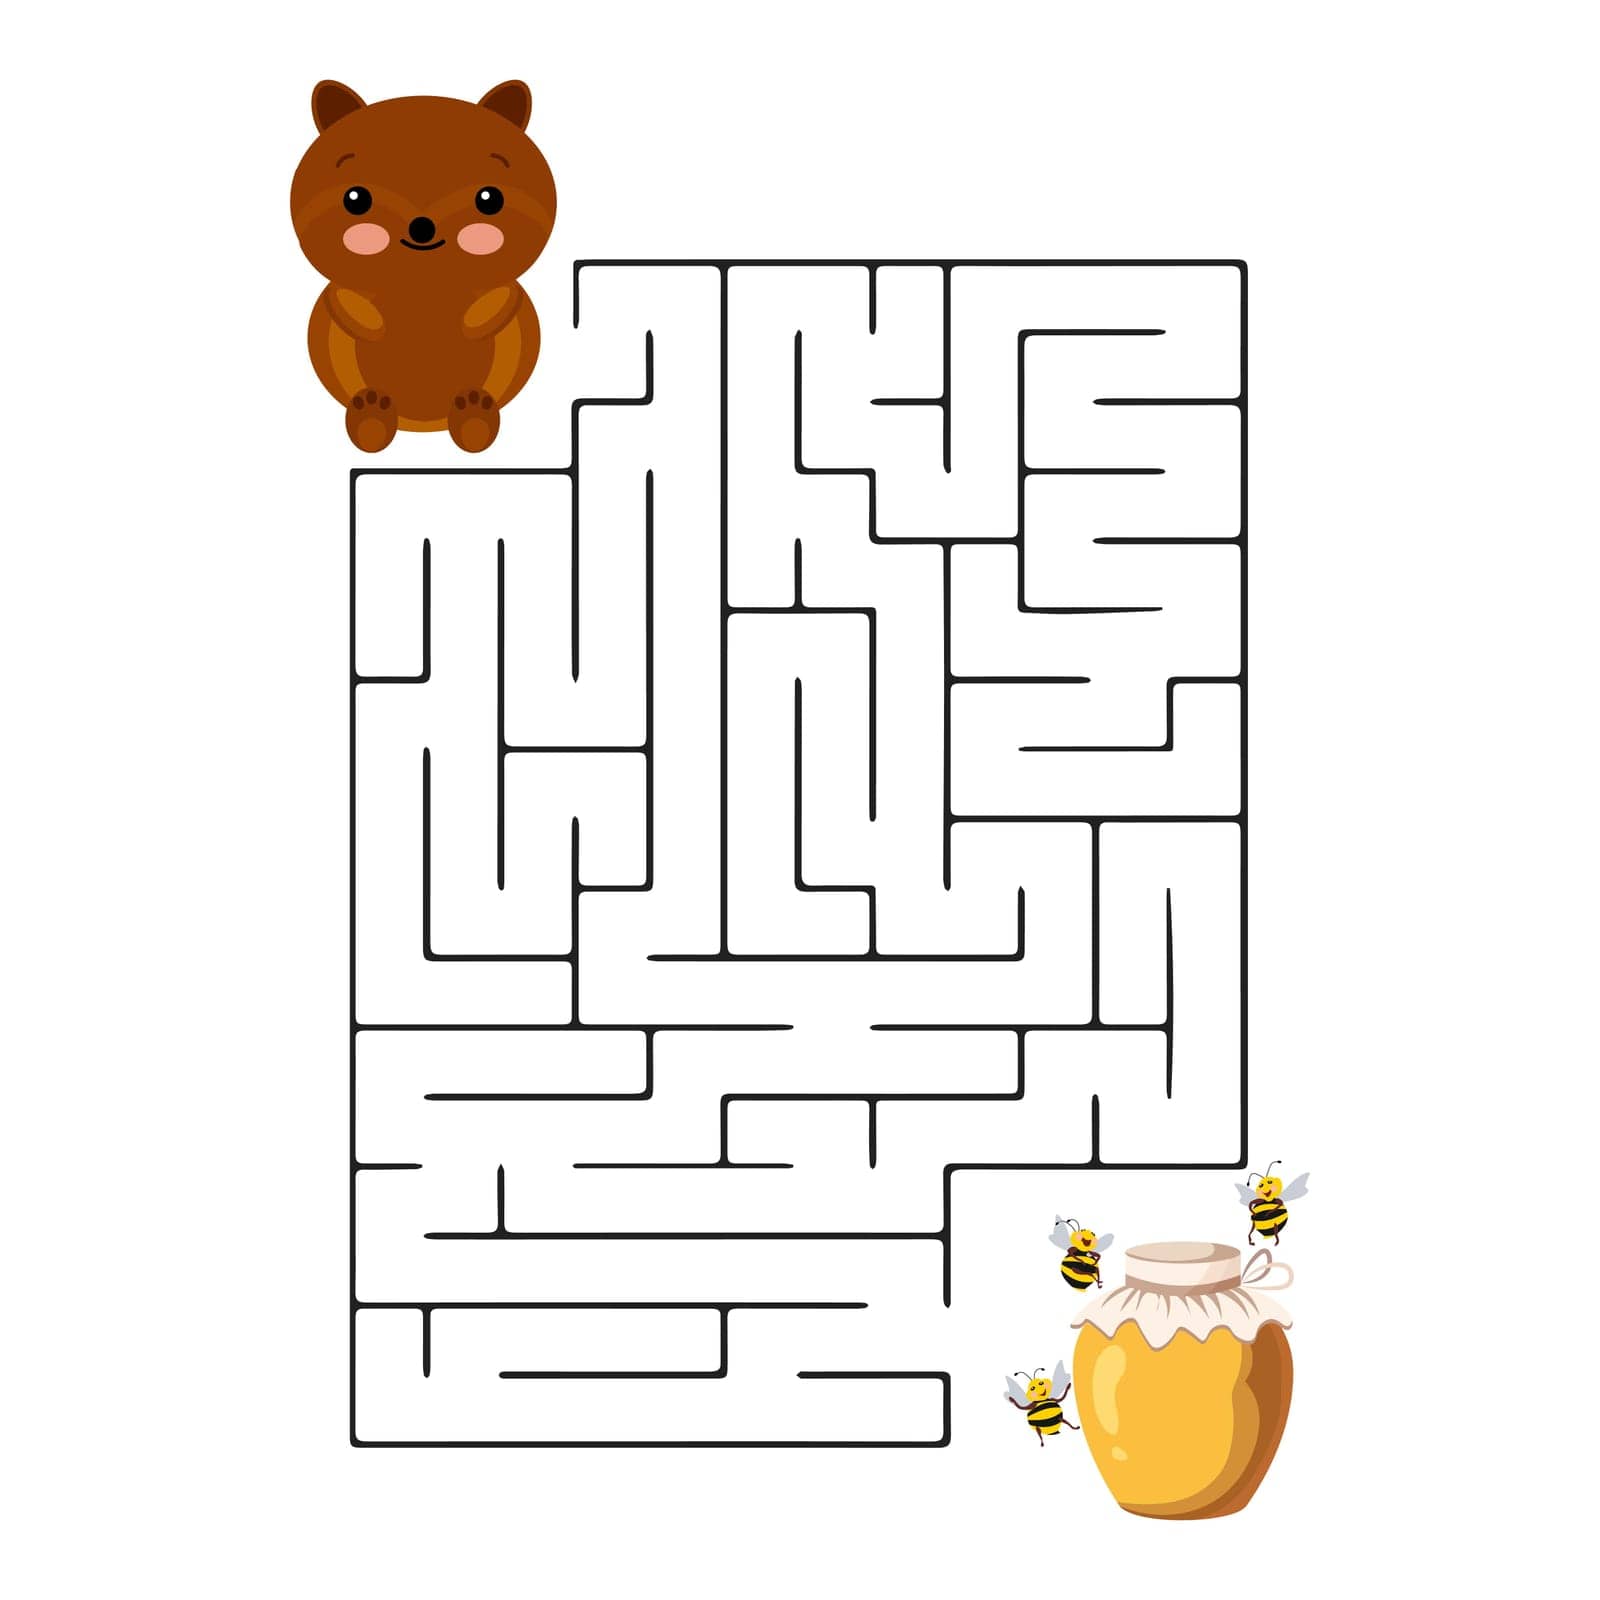 Children's maze with animals, a cute bear and a barrel of honey. Illustration, vector